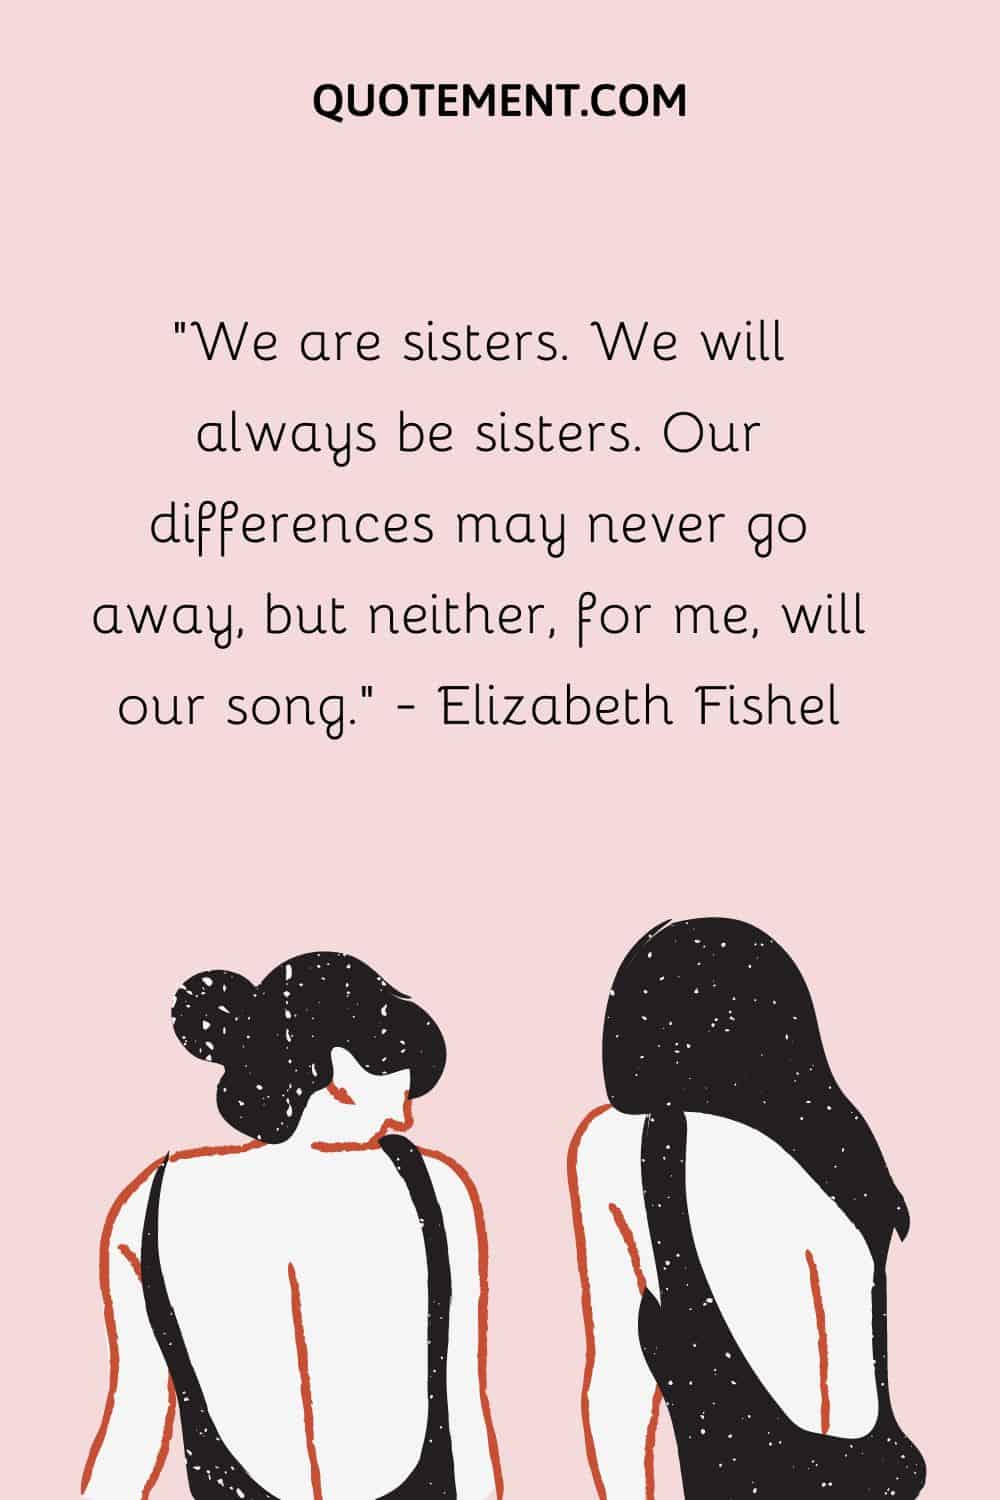 We are sisters. We will always be sisters